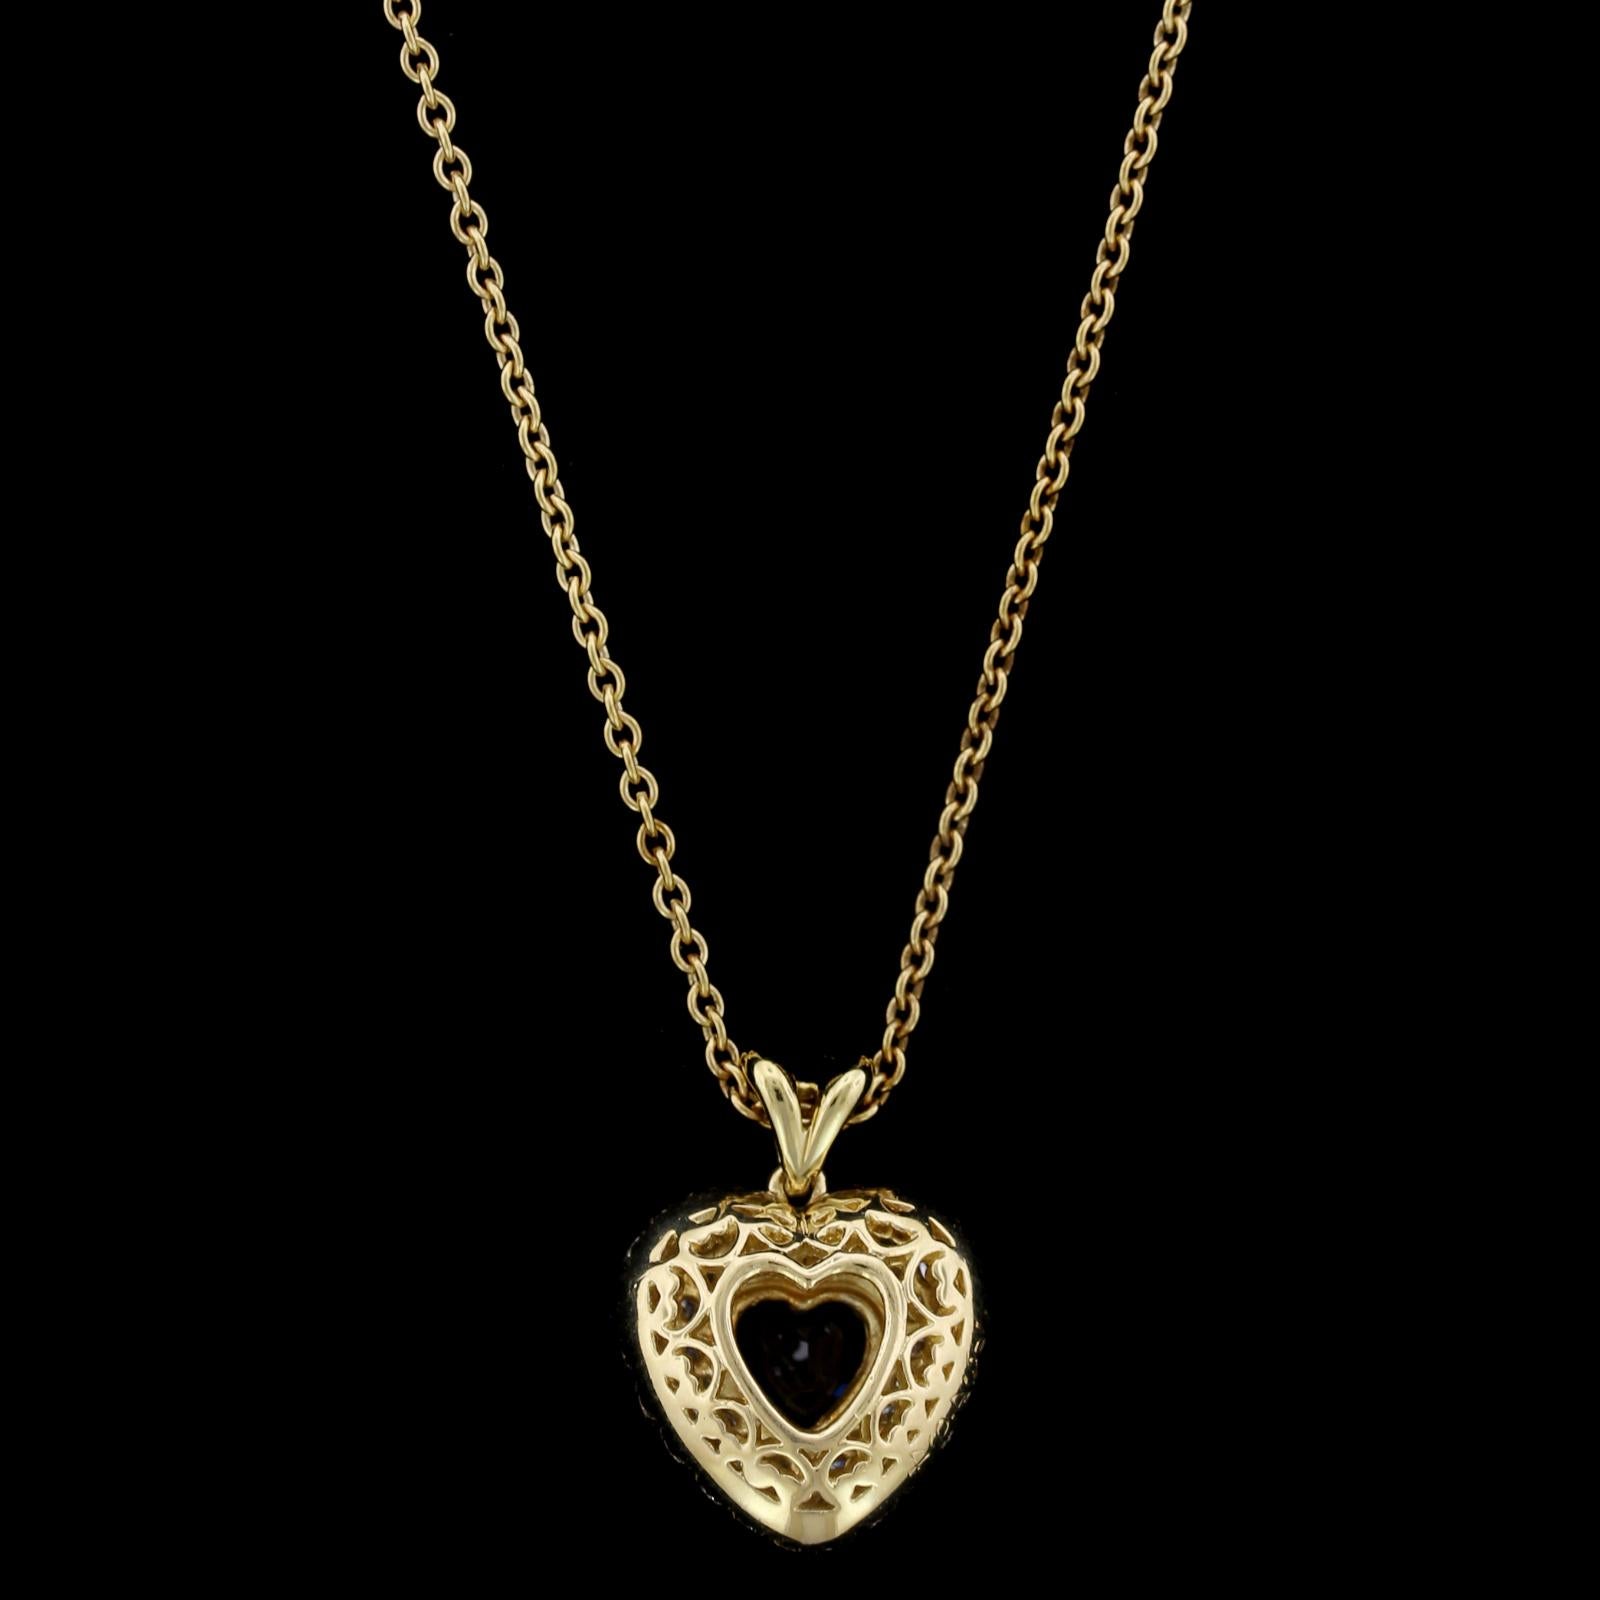 Kurt Wayne 18K Yellow Gold Sapphire and Diamond Heart Pendant. The pendant is bezel set with a heart shaped sapphire weighing approx. .75cts., and pave set with 60 full cut diamonds, approx. total wt. 1.00cts., FG color, VS clarity, #73494, 16